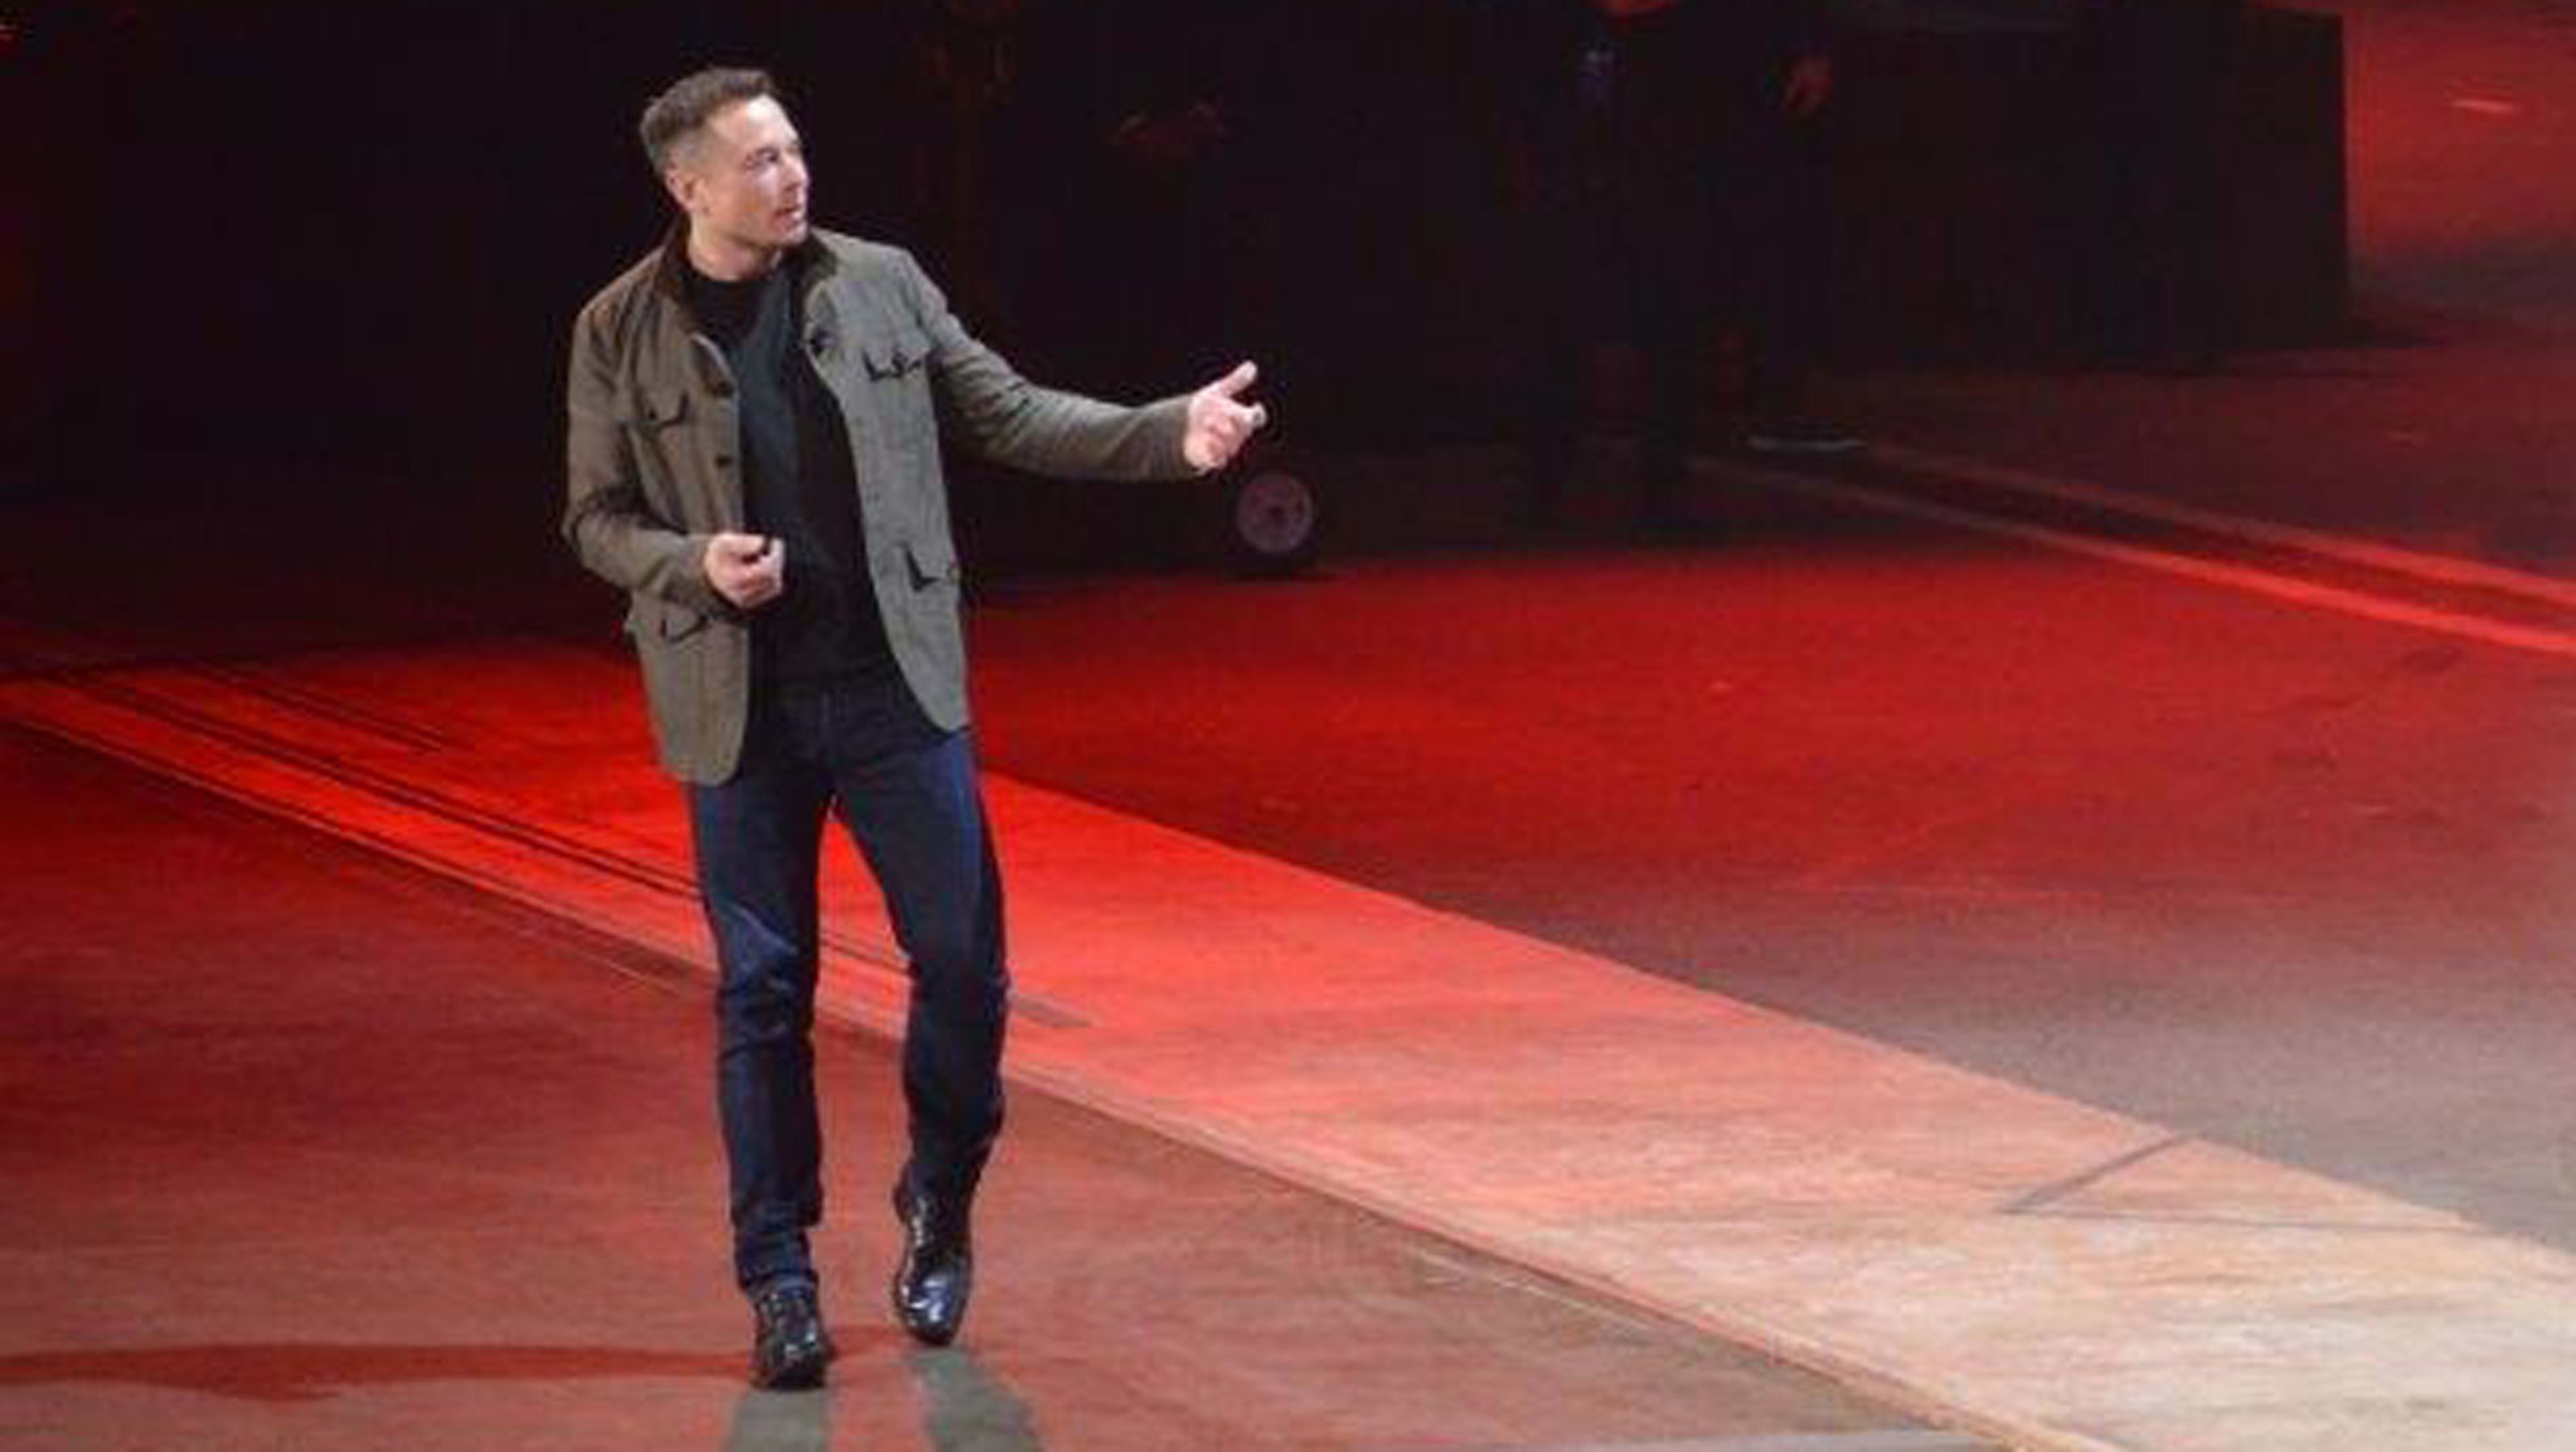 The real star of Tesla’s truck event was its new ultra-fast Roadster